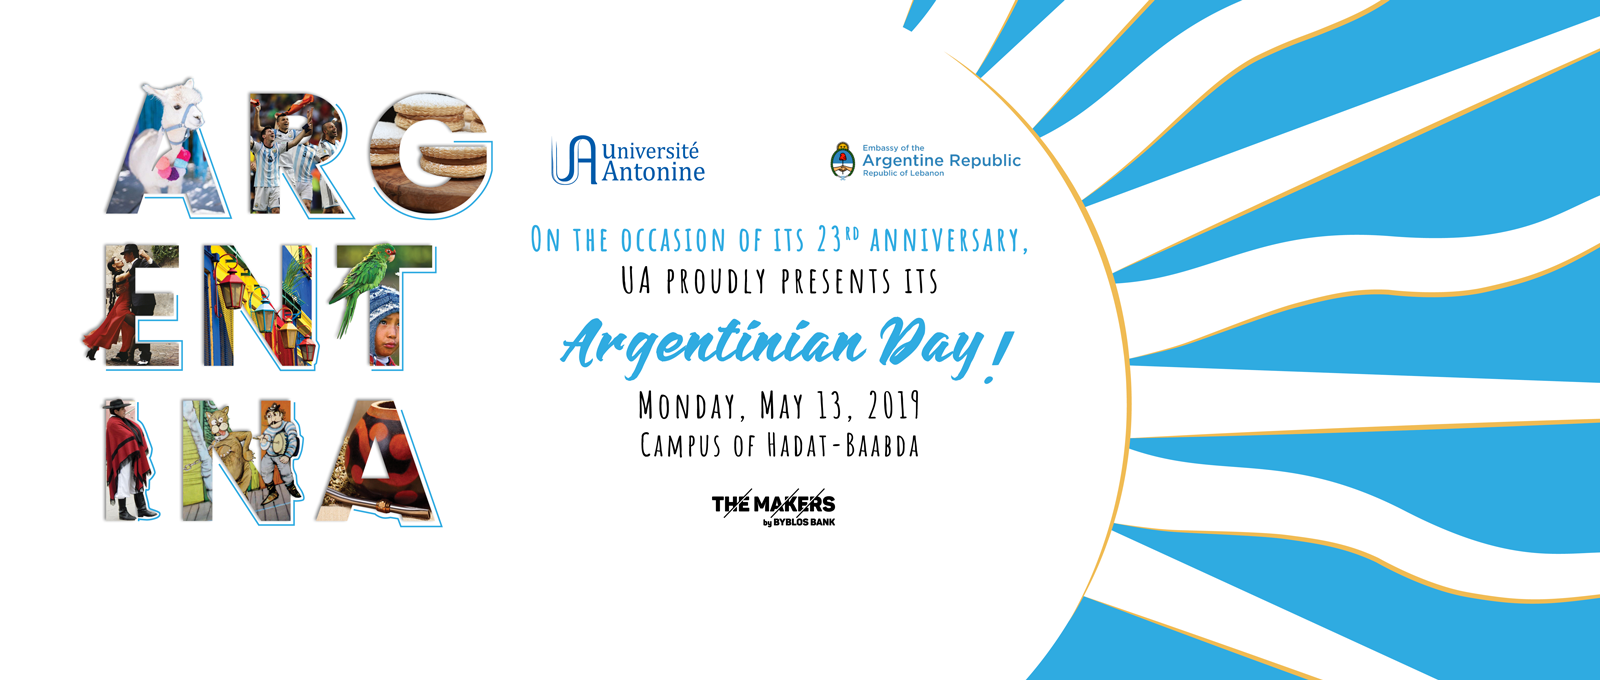  Founders' Day at UA | Argentinian Day 